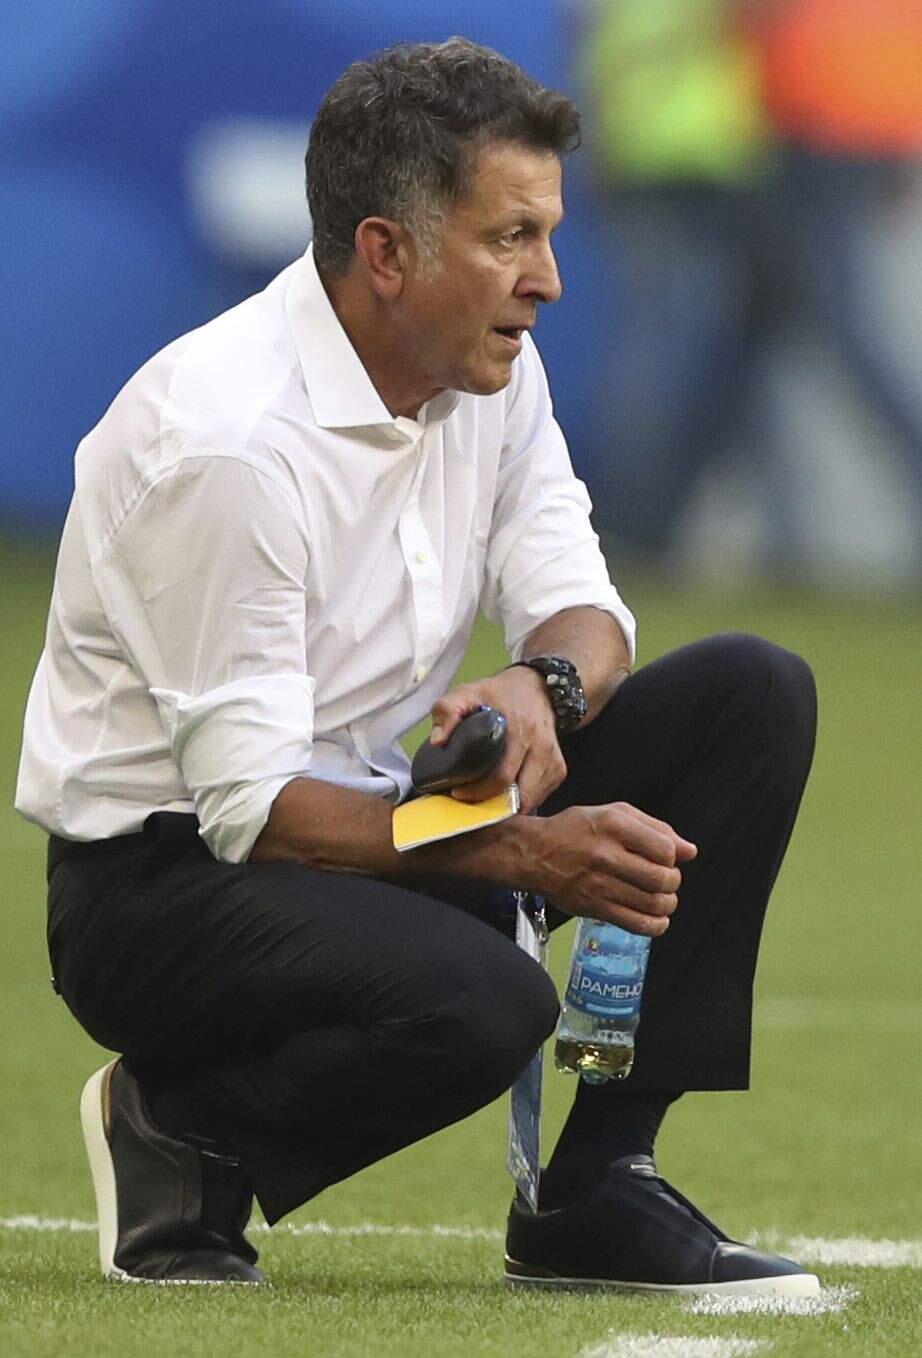 Mexico head coach Juan Carlos Osorio follows the action during the match between Brazil and Mexico at the 2018 World Cup in the Samara Arena, in Samara, Russia, Monday, July 2, 2018. (AP Photo/Thanassis Stavrakis)